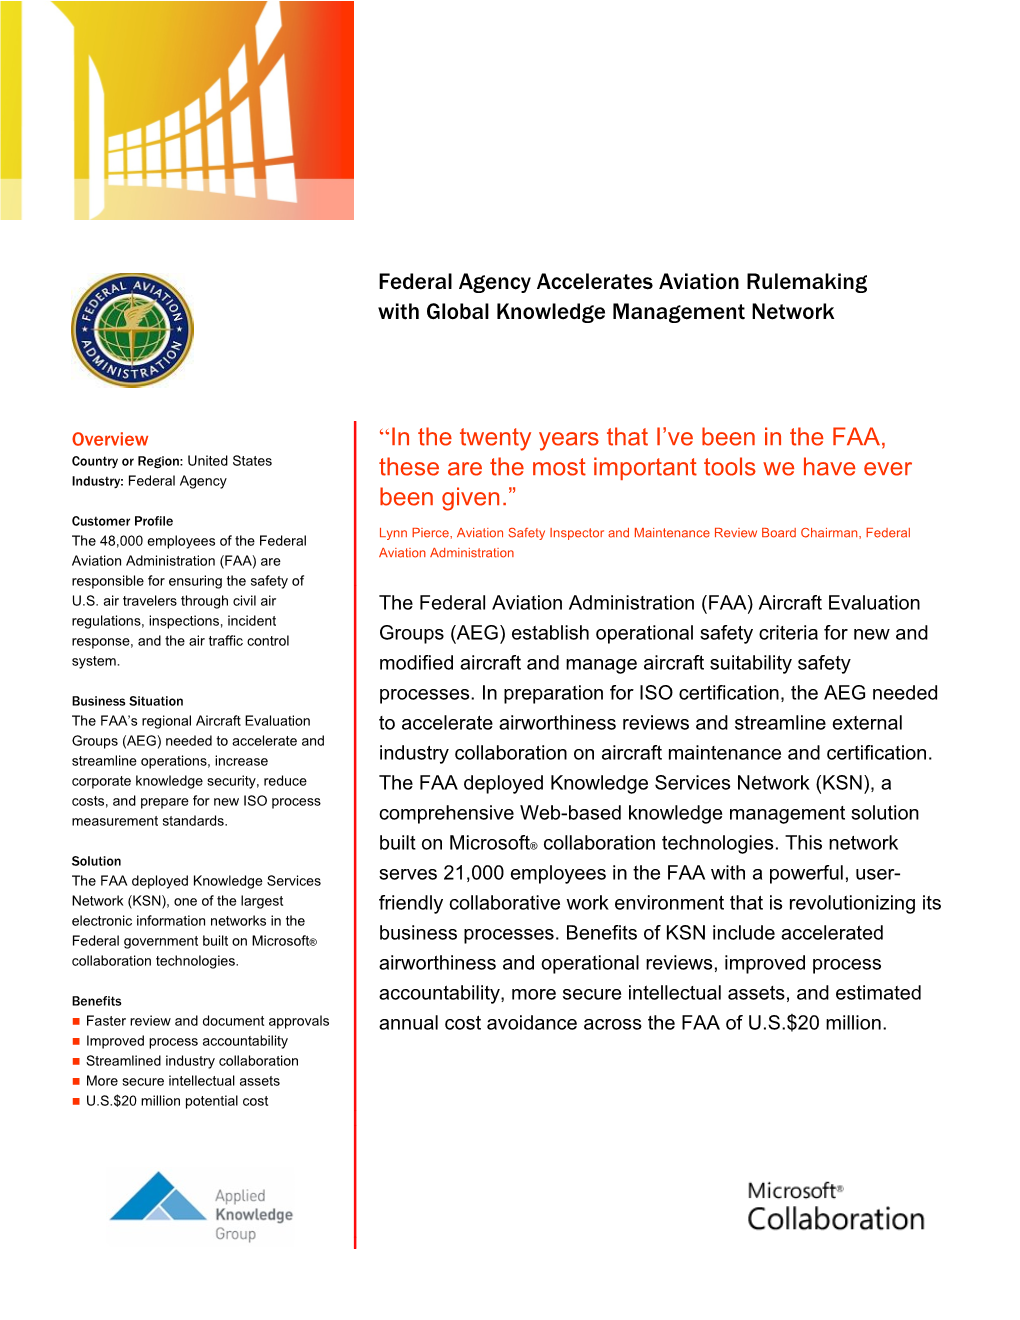 Federal Agency Accelerates Aviation Rulemaking With Global Knowledge Management Network